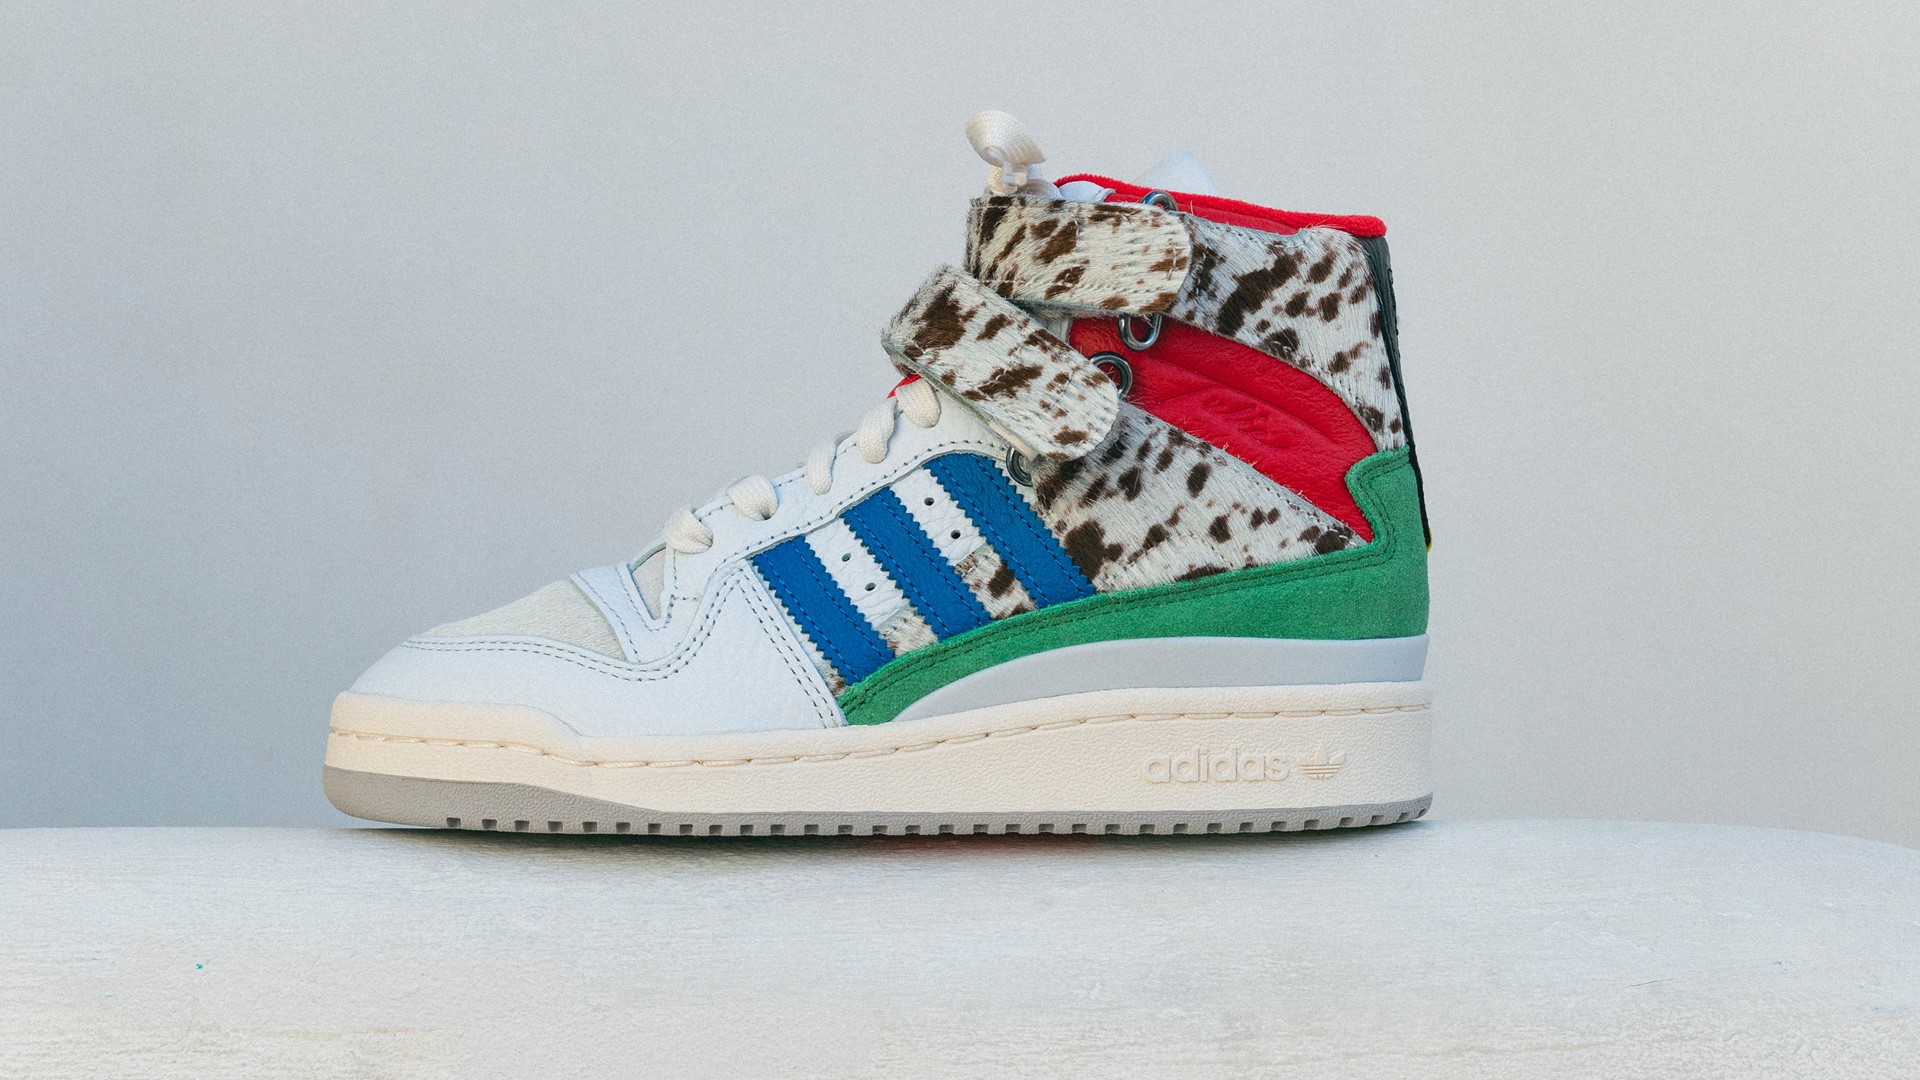 adidas and New Tulie Yaito Announce the reimagined Forum Hi